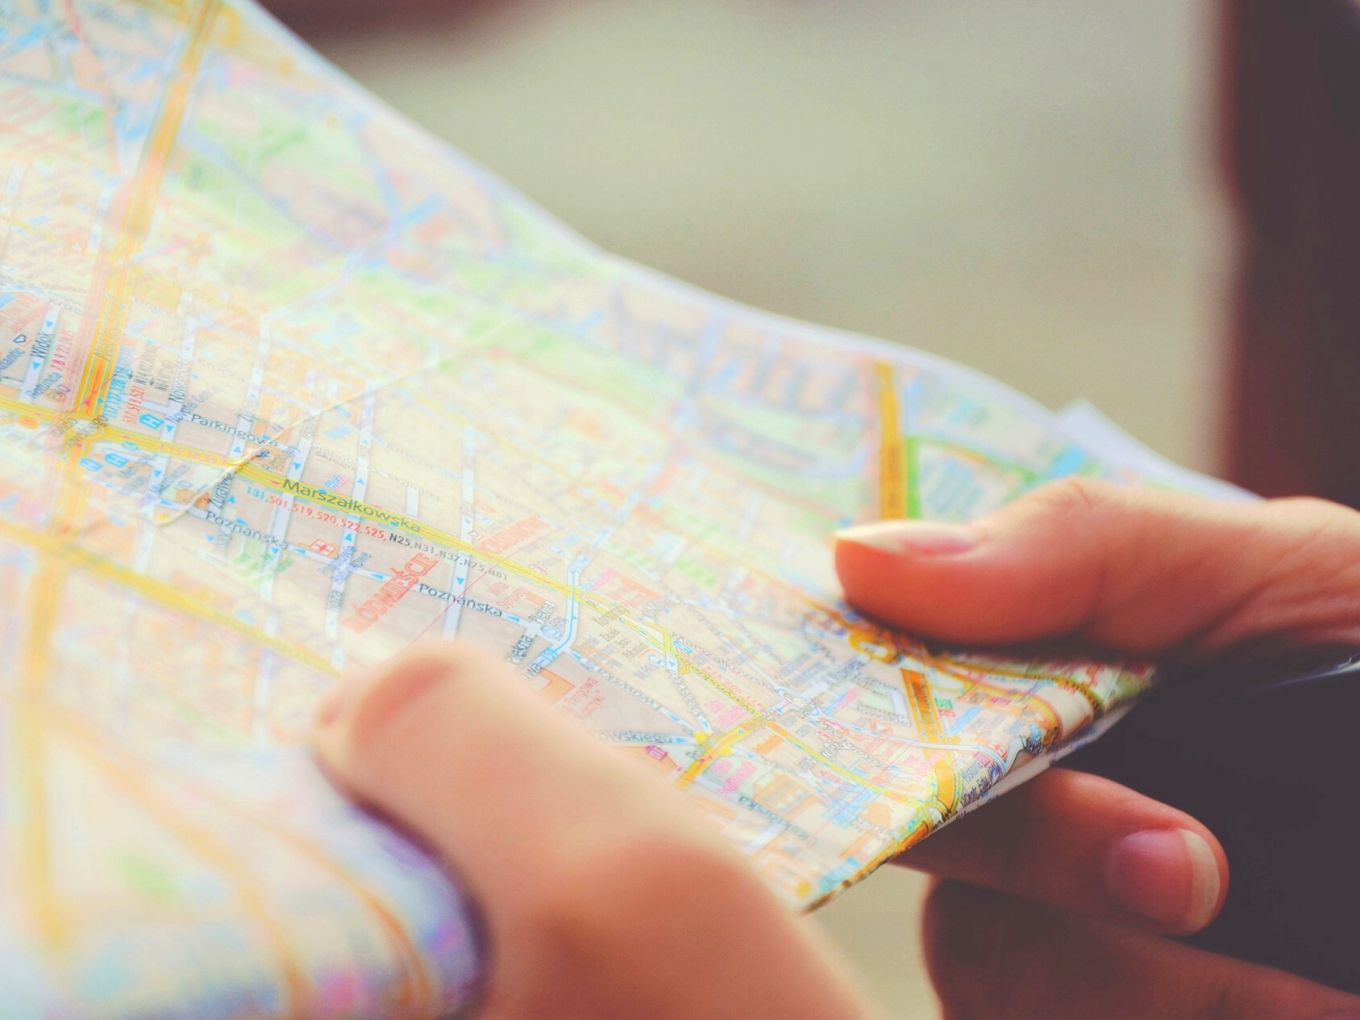 How Can Location-Based Discovery Help Create A Seamless Network Of Services?